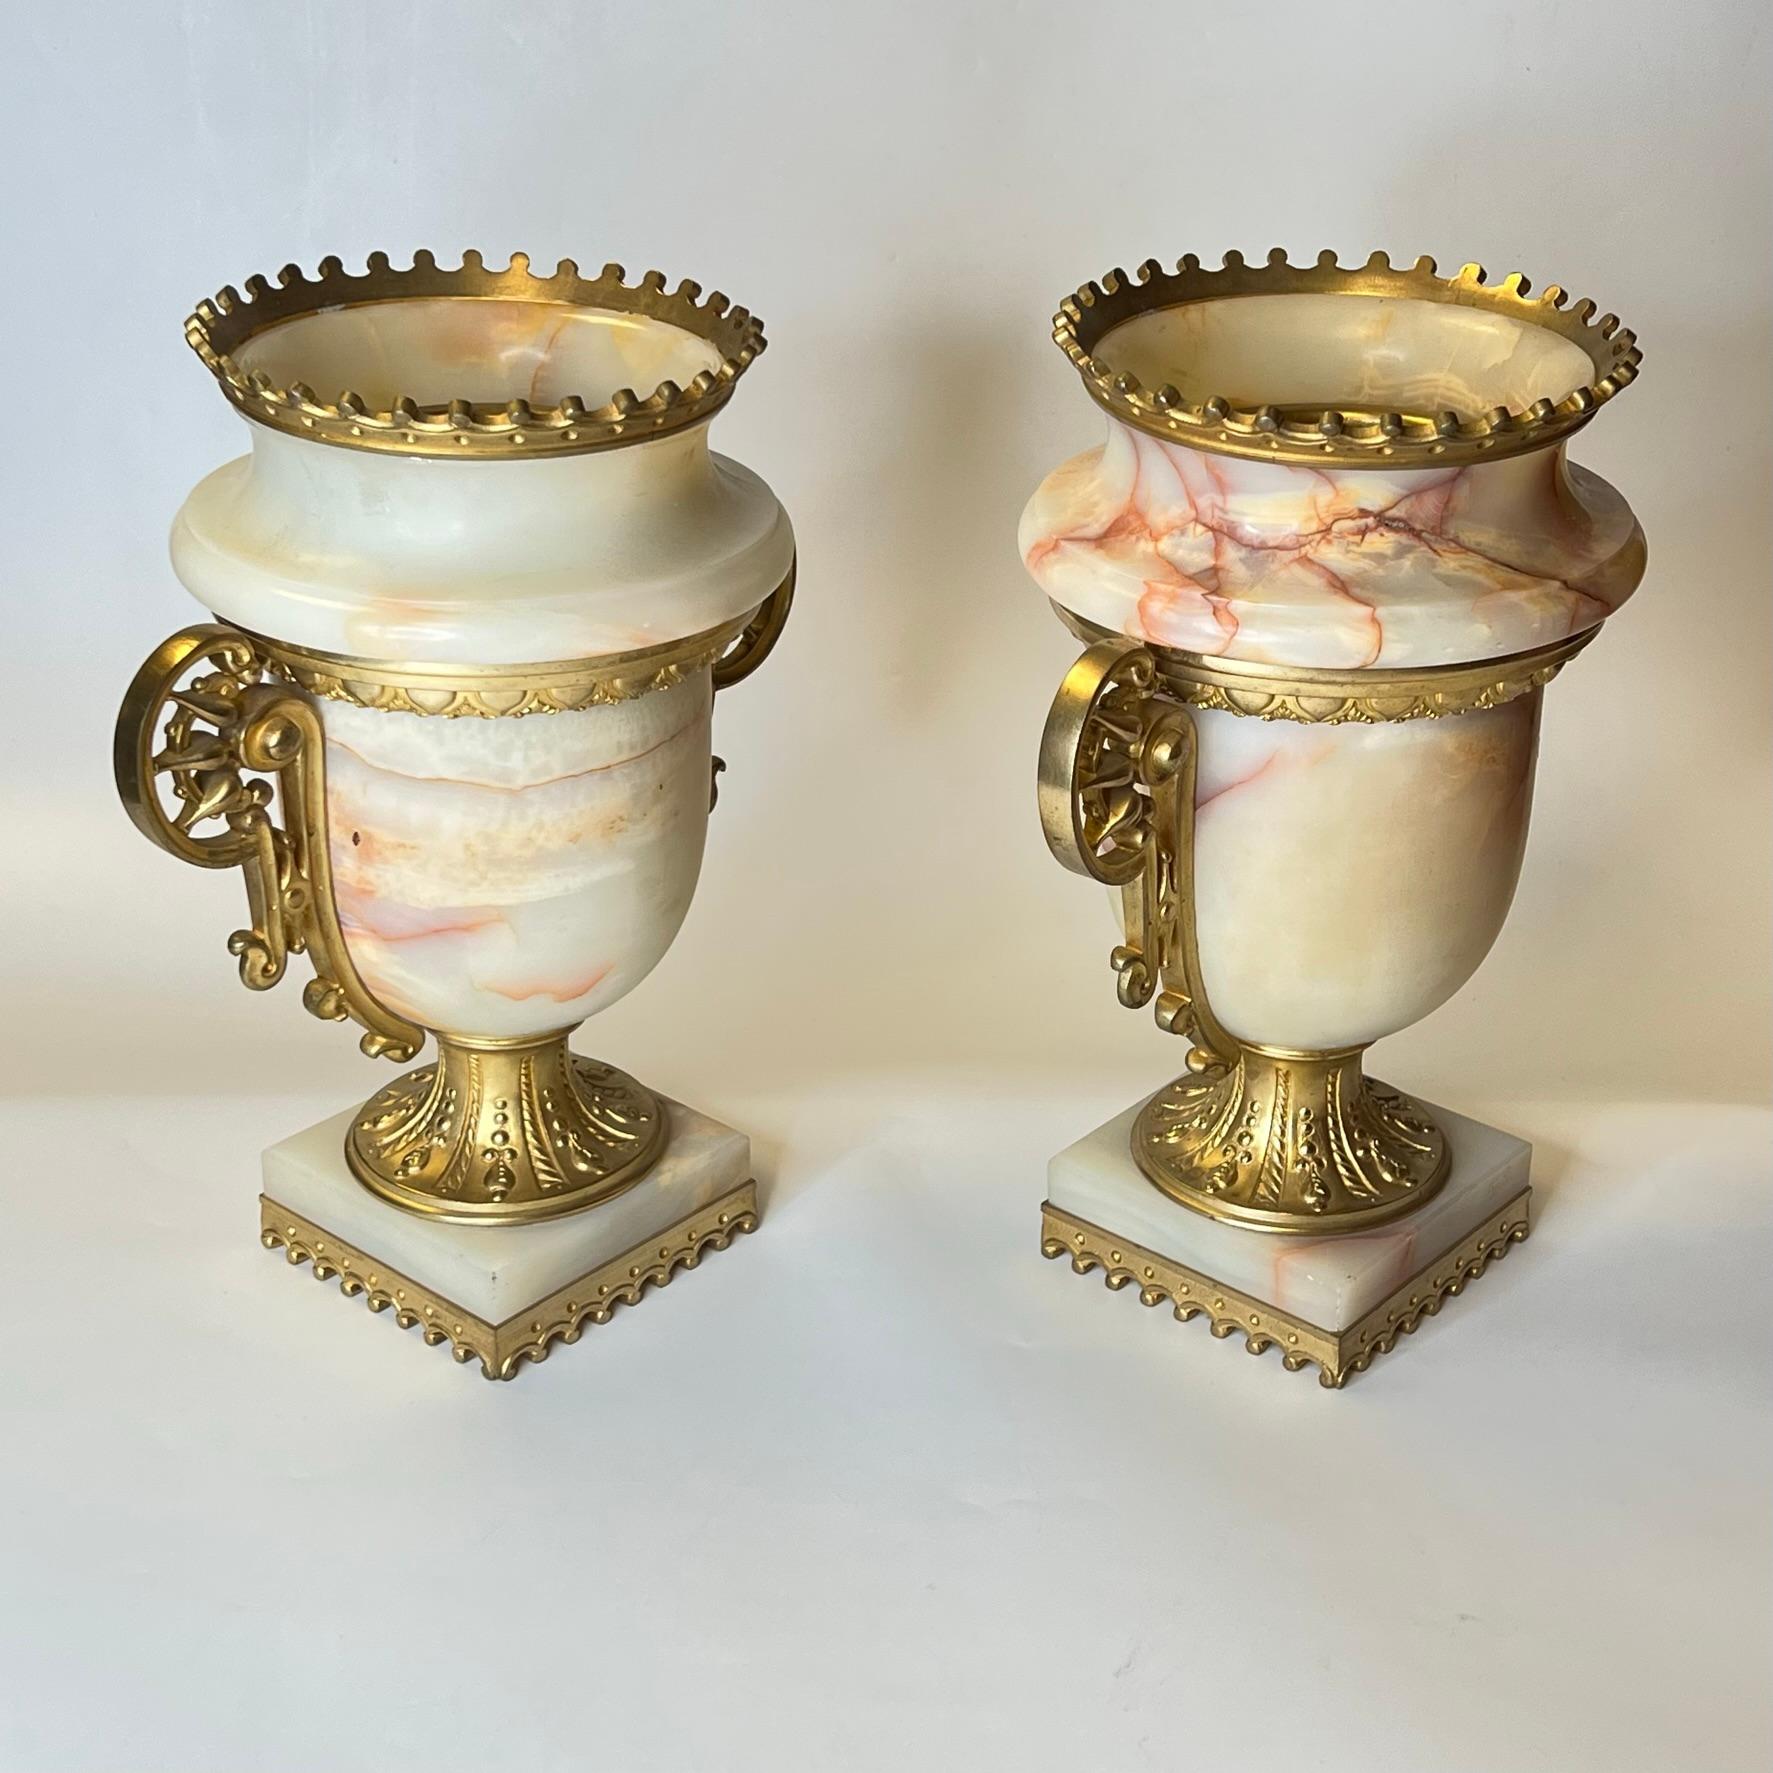 19th Century Pair Antique Gilt Bronze Mounted Onyx Urns in Neoclassical Style For Sale